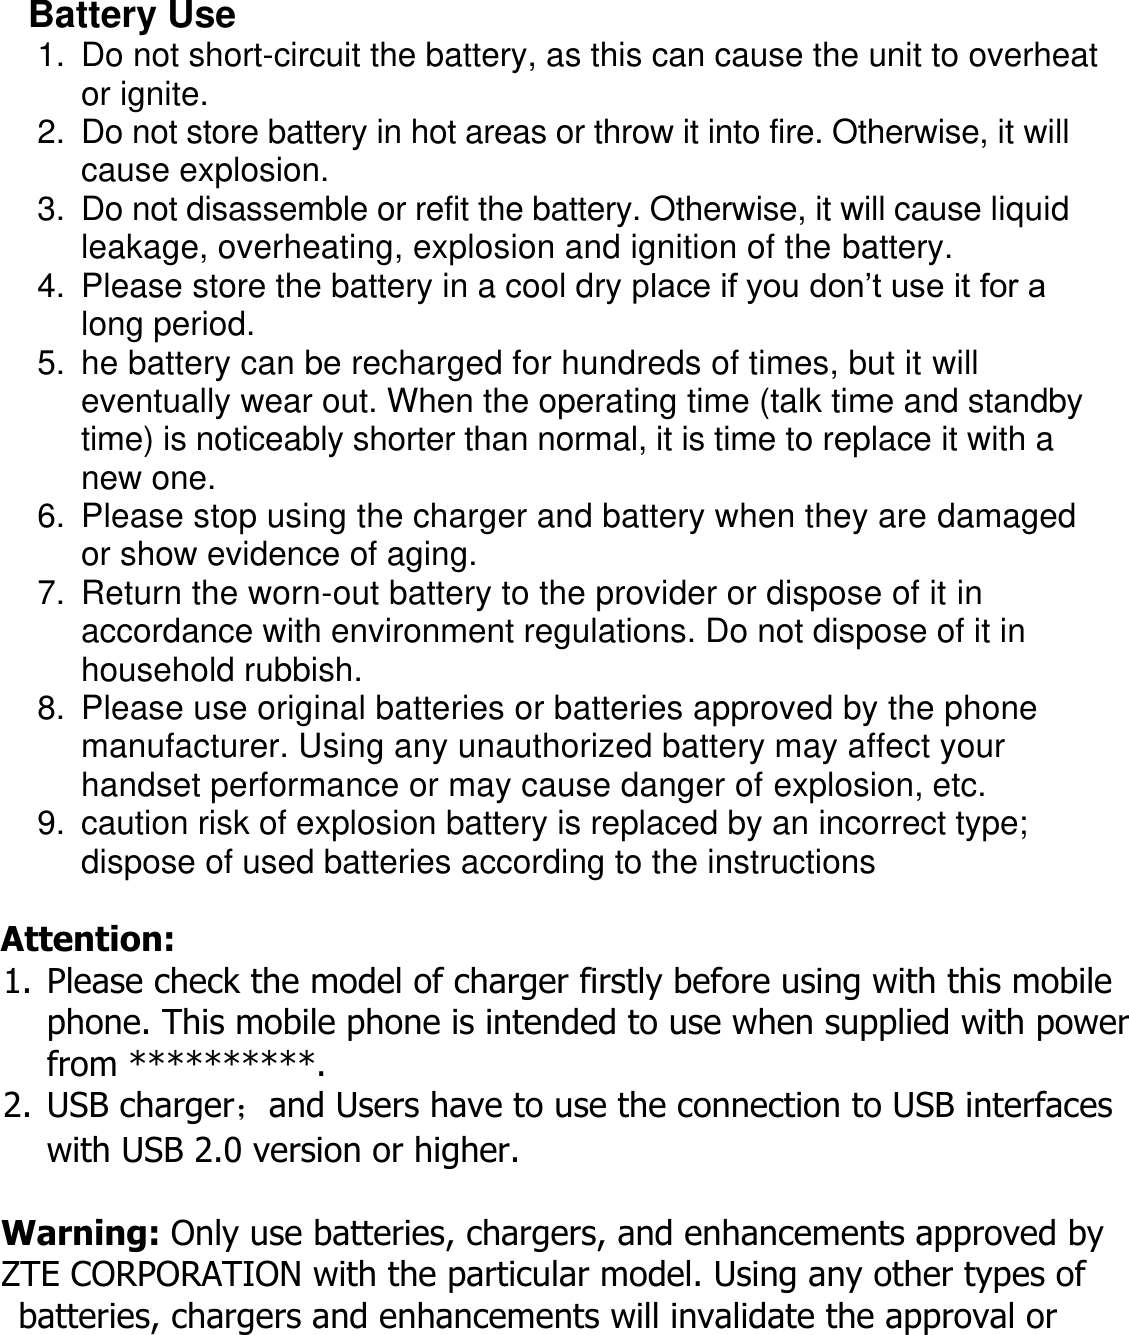               Battery Use 1.  Do not short-circuit the battery, as this can cause the unit to overheat   or ignite. 2.  Do not store battery in hot areas or throw it into fire. Otherwise, it will   cause explosion. 3.  Do not disassemble or refit the battery. Otherwise, it will cause liquid leakage, overheating, explosion and ignition of the battery. 4.  Please store the battery in a cool dry place if you don’t use it for a   long period. 5.  he battery can be recharged for hundreds of times, but it will   eventually wear out. When the operating time (talk time and standby   time) is noticeably shorter than normal, it is time to replace it with a   new one. 6.  Please stop using the charger and battery when they are damaged   or show evidence of aging.   7.  Return the worn-out battery to the provider or dispose of it in   accordance with environment regulations. Do not dispose of it in household rubbish. 8.  Please use original batteries or batteries approved by the phone manufacturer. Using any unauthorized battery may affect your   handset performance or may cause danger of explosion, etc. 9.  caution risk of explosion battery is replaced by an incorrect type;  dispose of used batteries according to the instructions          Attention:   1. Please check the model of charger firstly before using with this mobile phone. This mobile phone is intended to use when supplied with power from **********. 2. USB charger；and Users have to use the connection to USB interfaces   with USB 2.0 version or higher.  Warning: Only use batteries, chargers, and enhancements approved by   ZTE CORPORATION with the particular model. Using any other types of batteries, chargers and enhancements will invalidate the approval or 